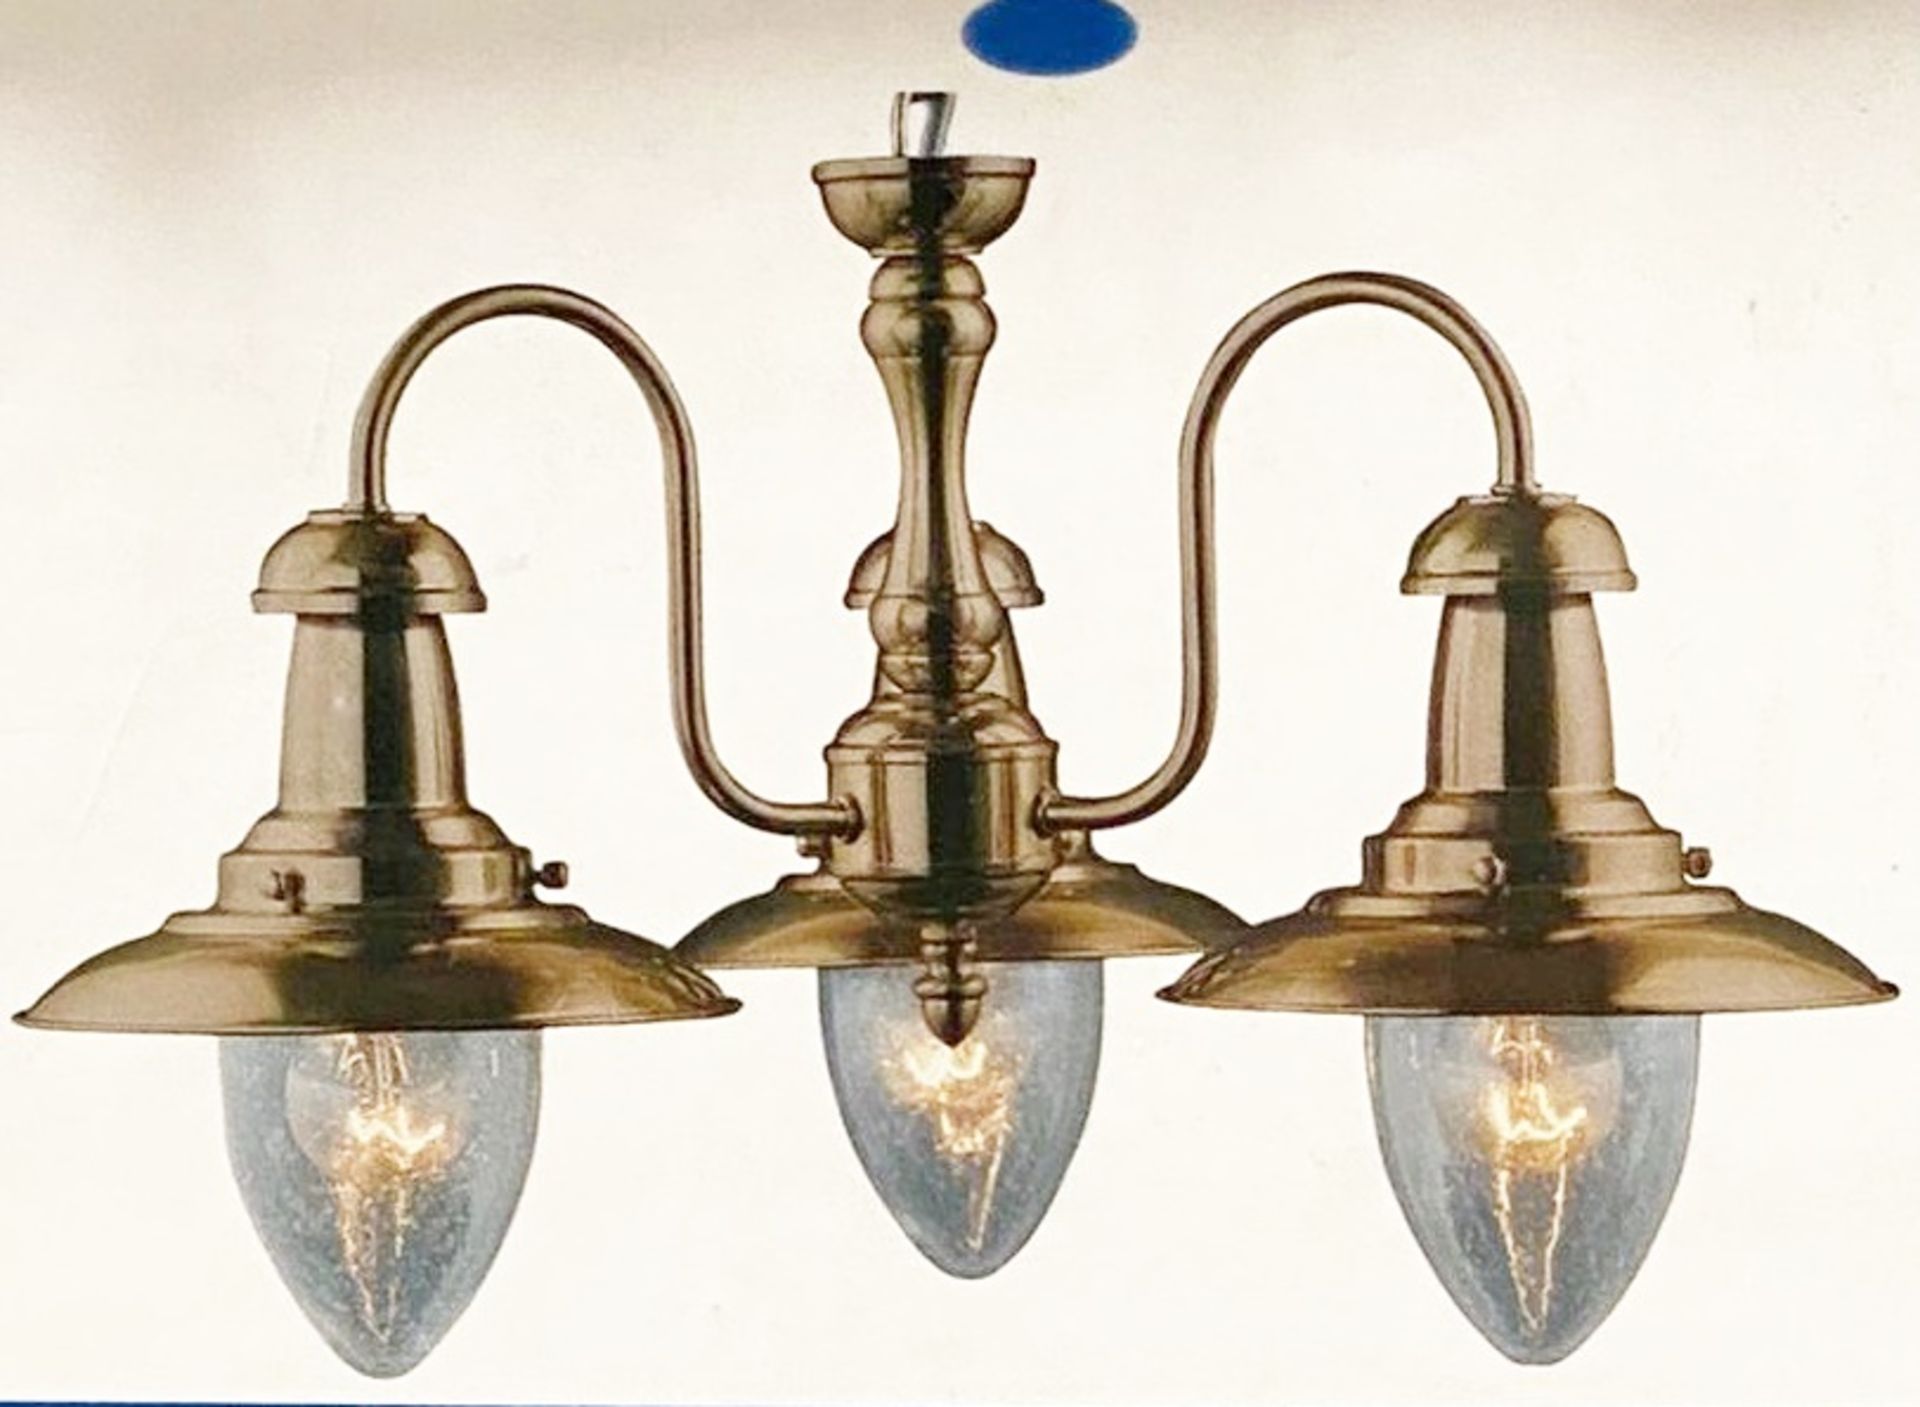 1 x Searchlight Fisherman Antique Brass 3 light Fitting - Ref: 5333-3AB - New and Boxed - RRP: £144